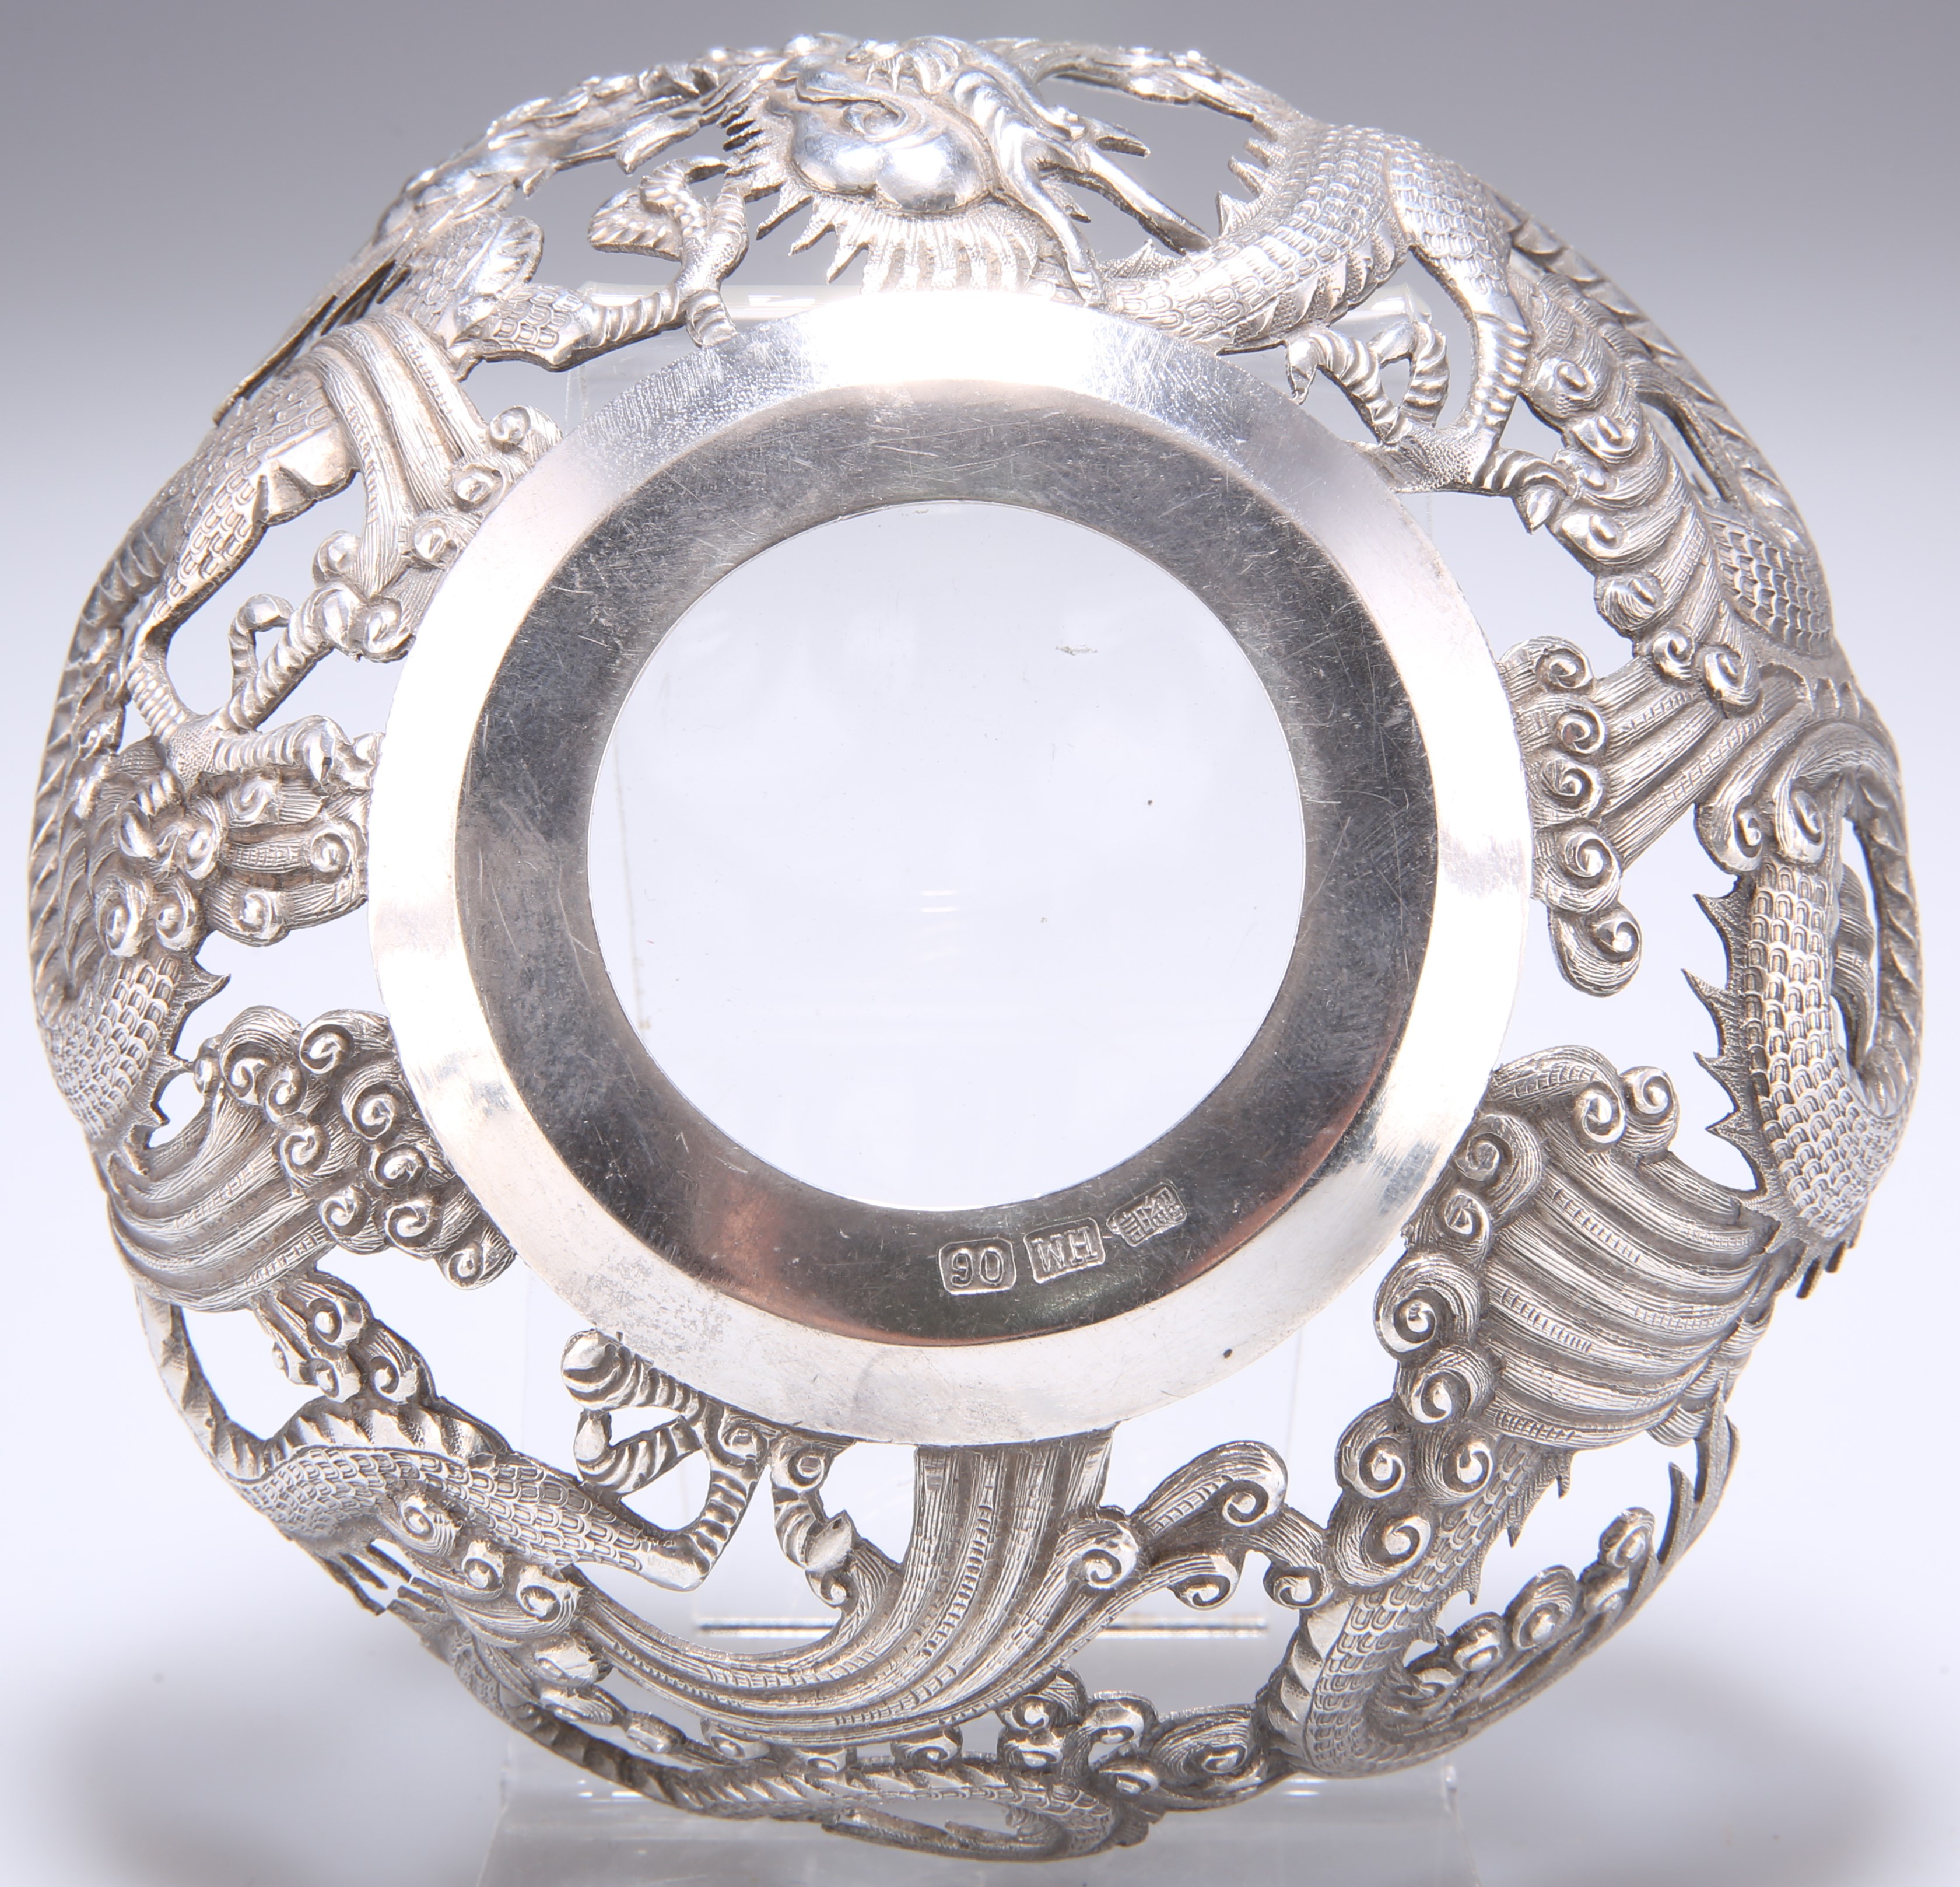 A HARLEQUIN SET OF SIX CHINESE SILVER BOWL MOUNTS - Image 3 of 3